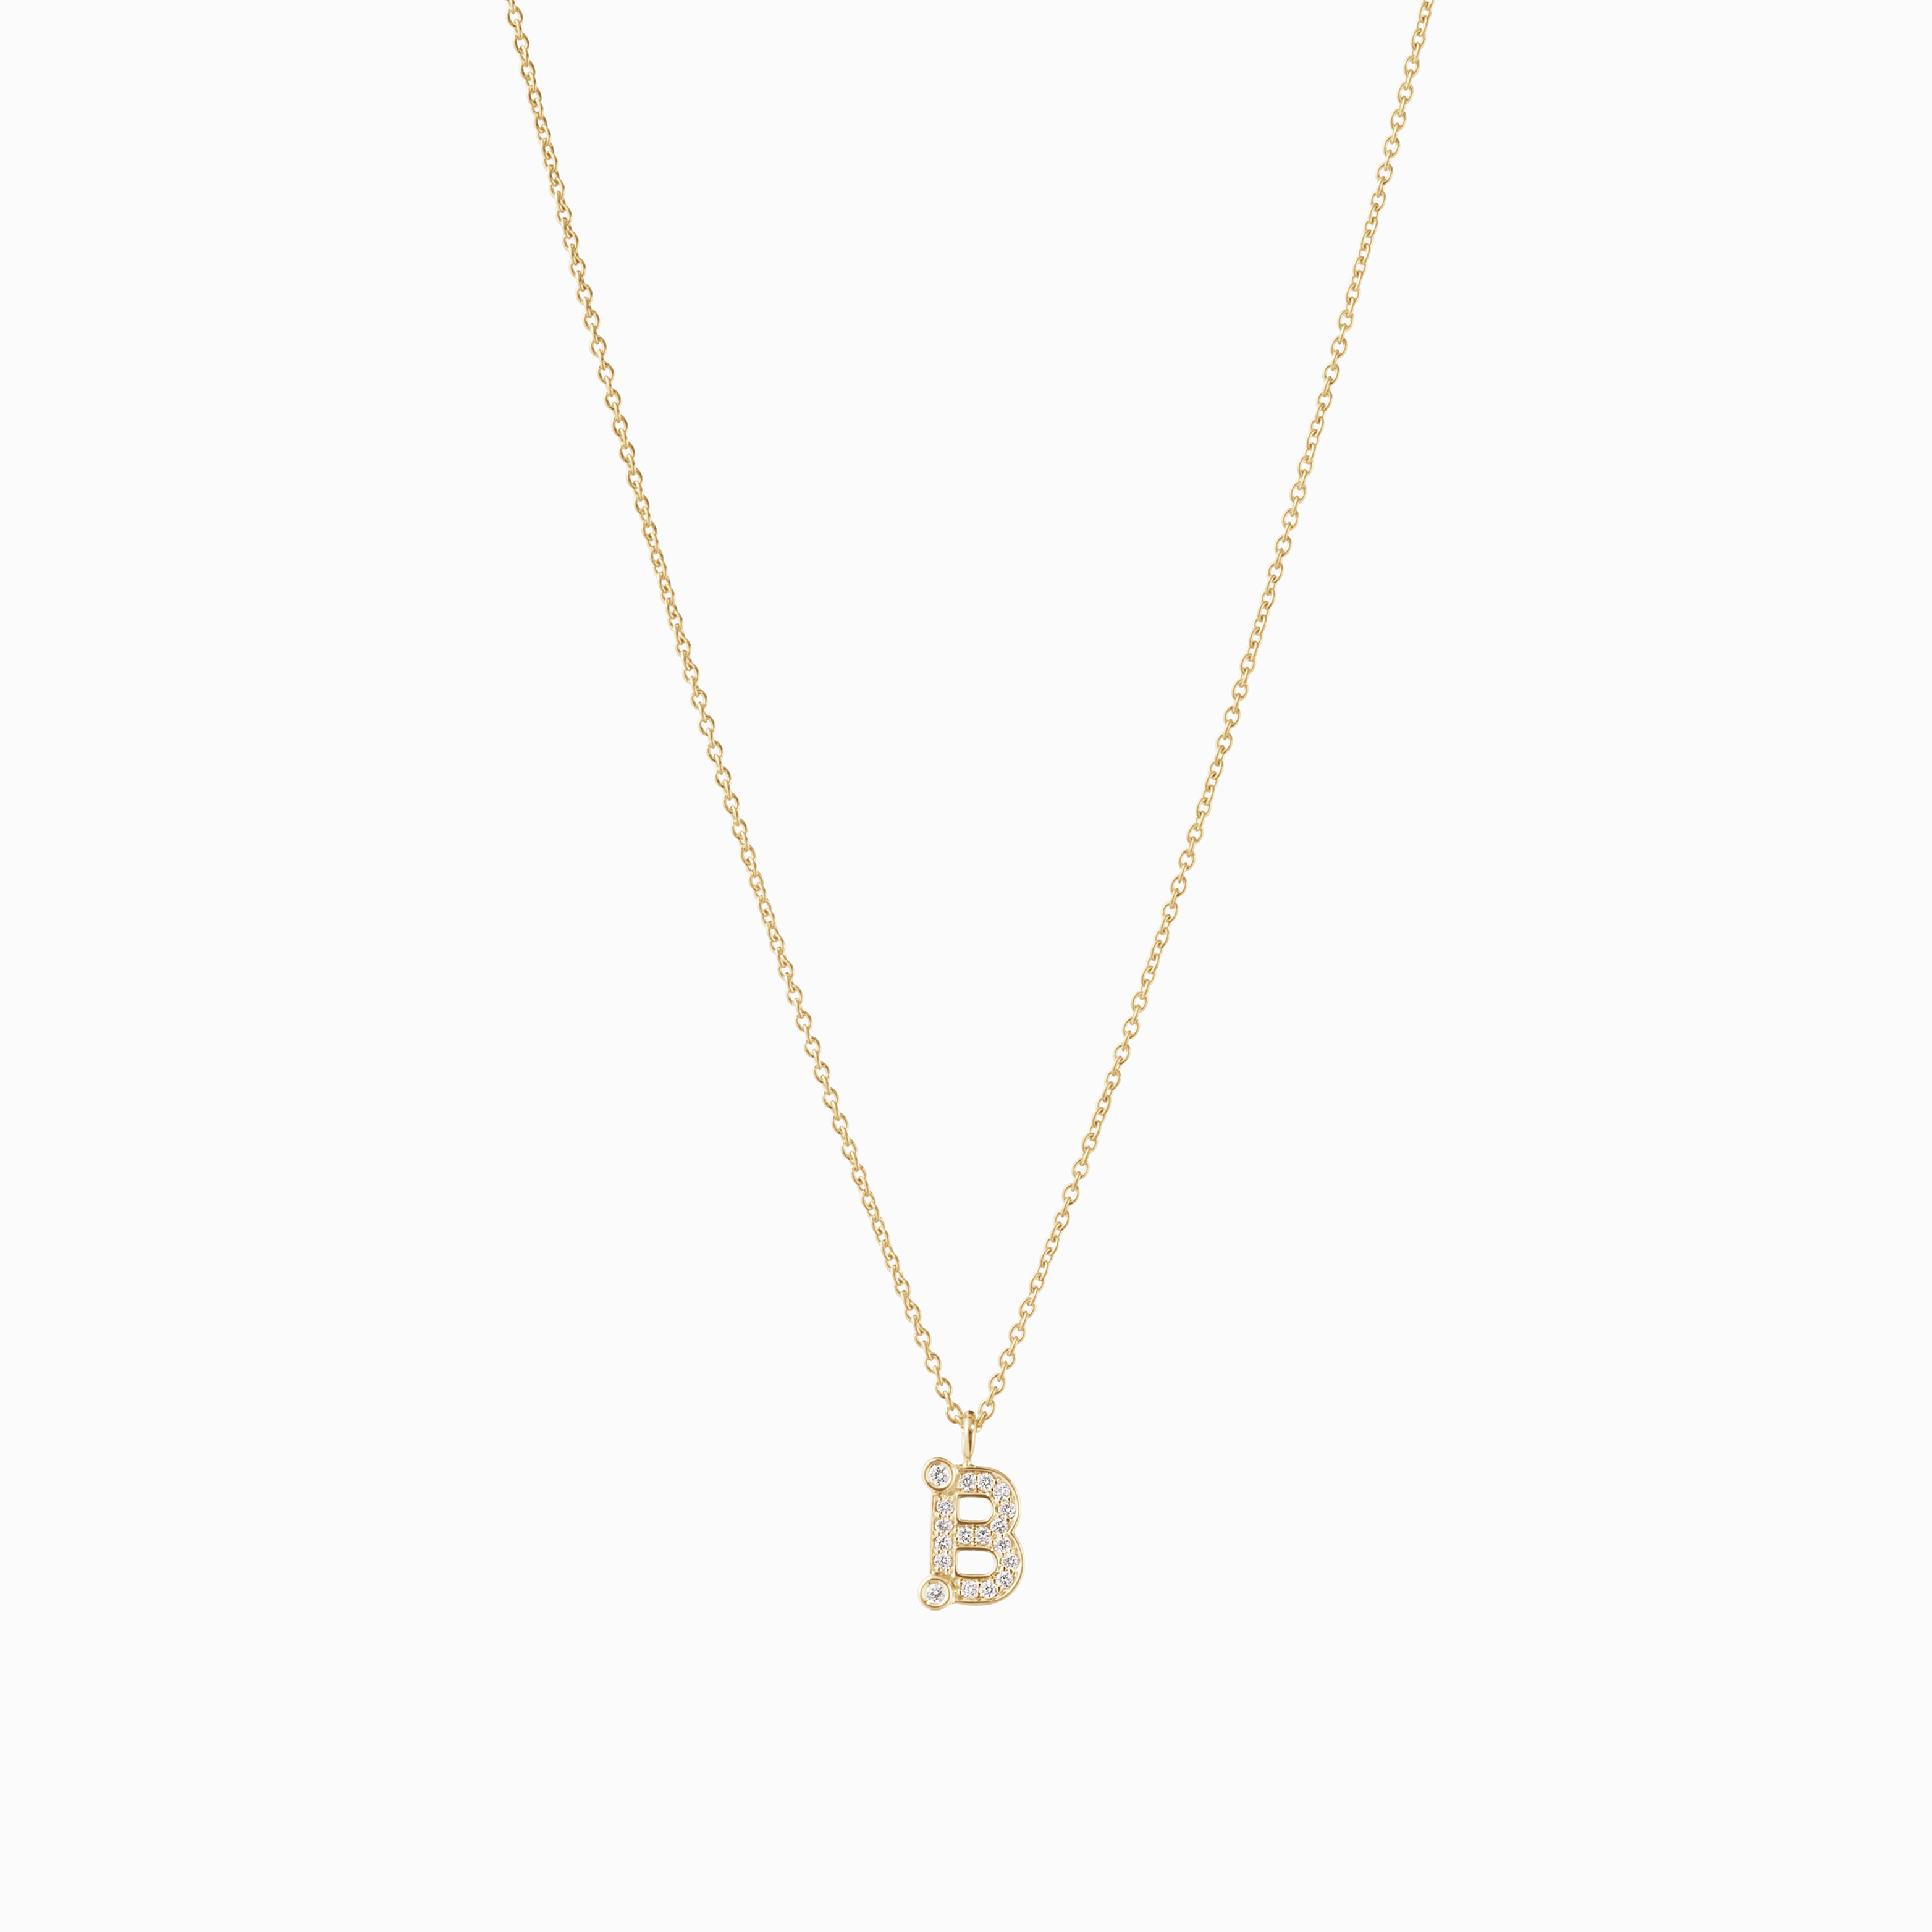 XL Luv Paperclip Initial Necklace in 18K Gold Vermeil - MyNameNecklace